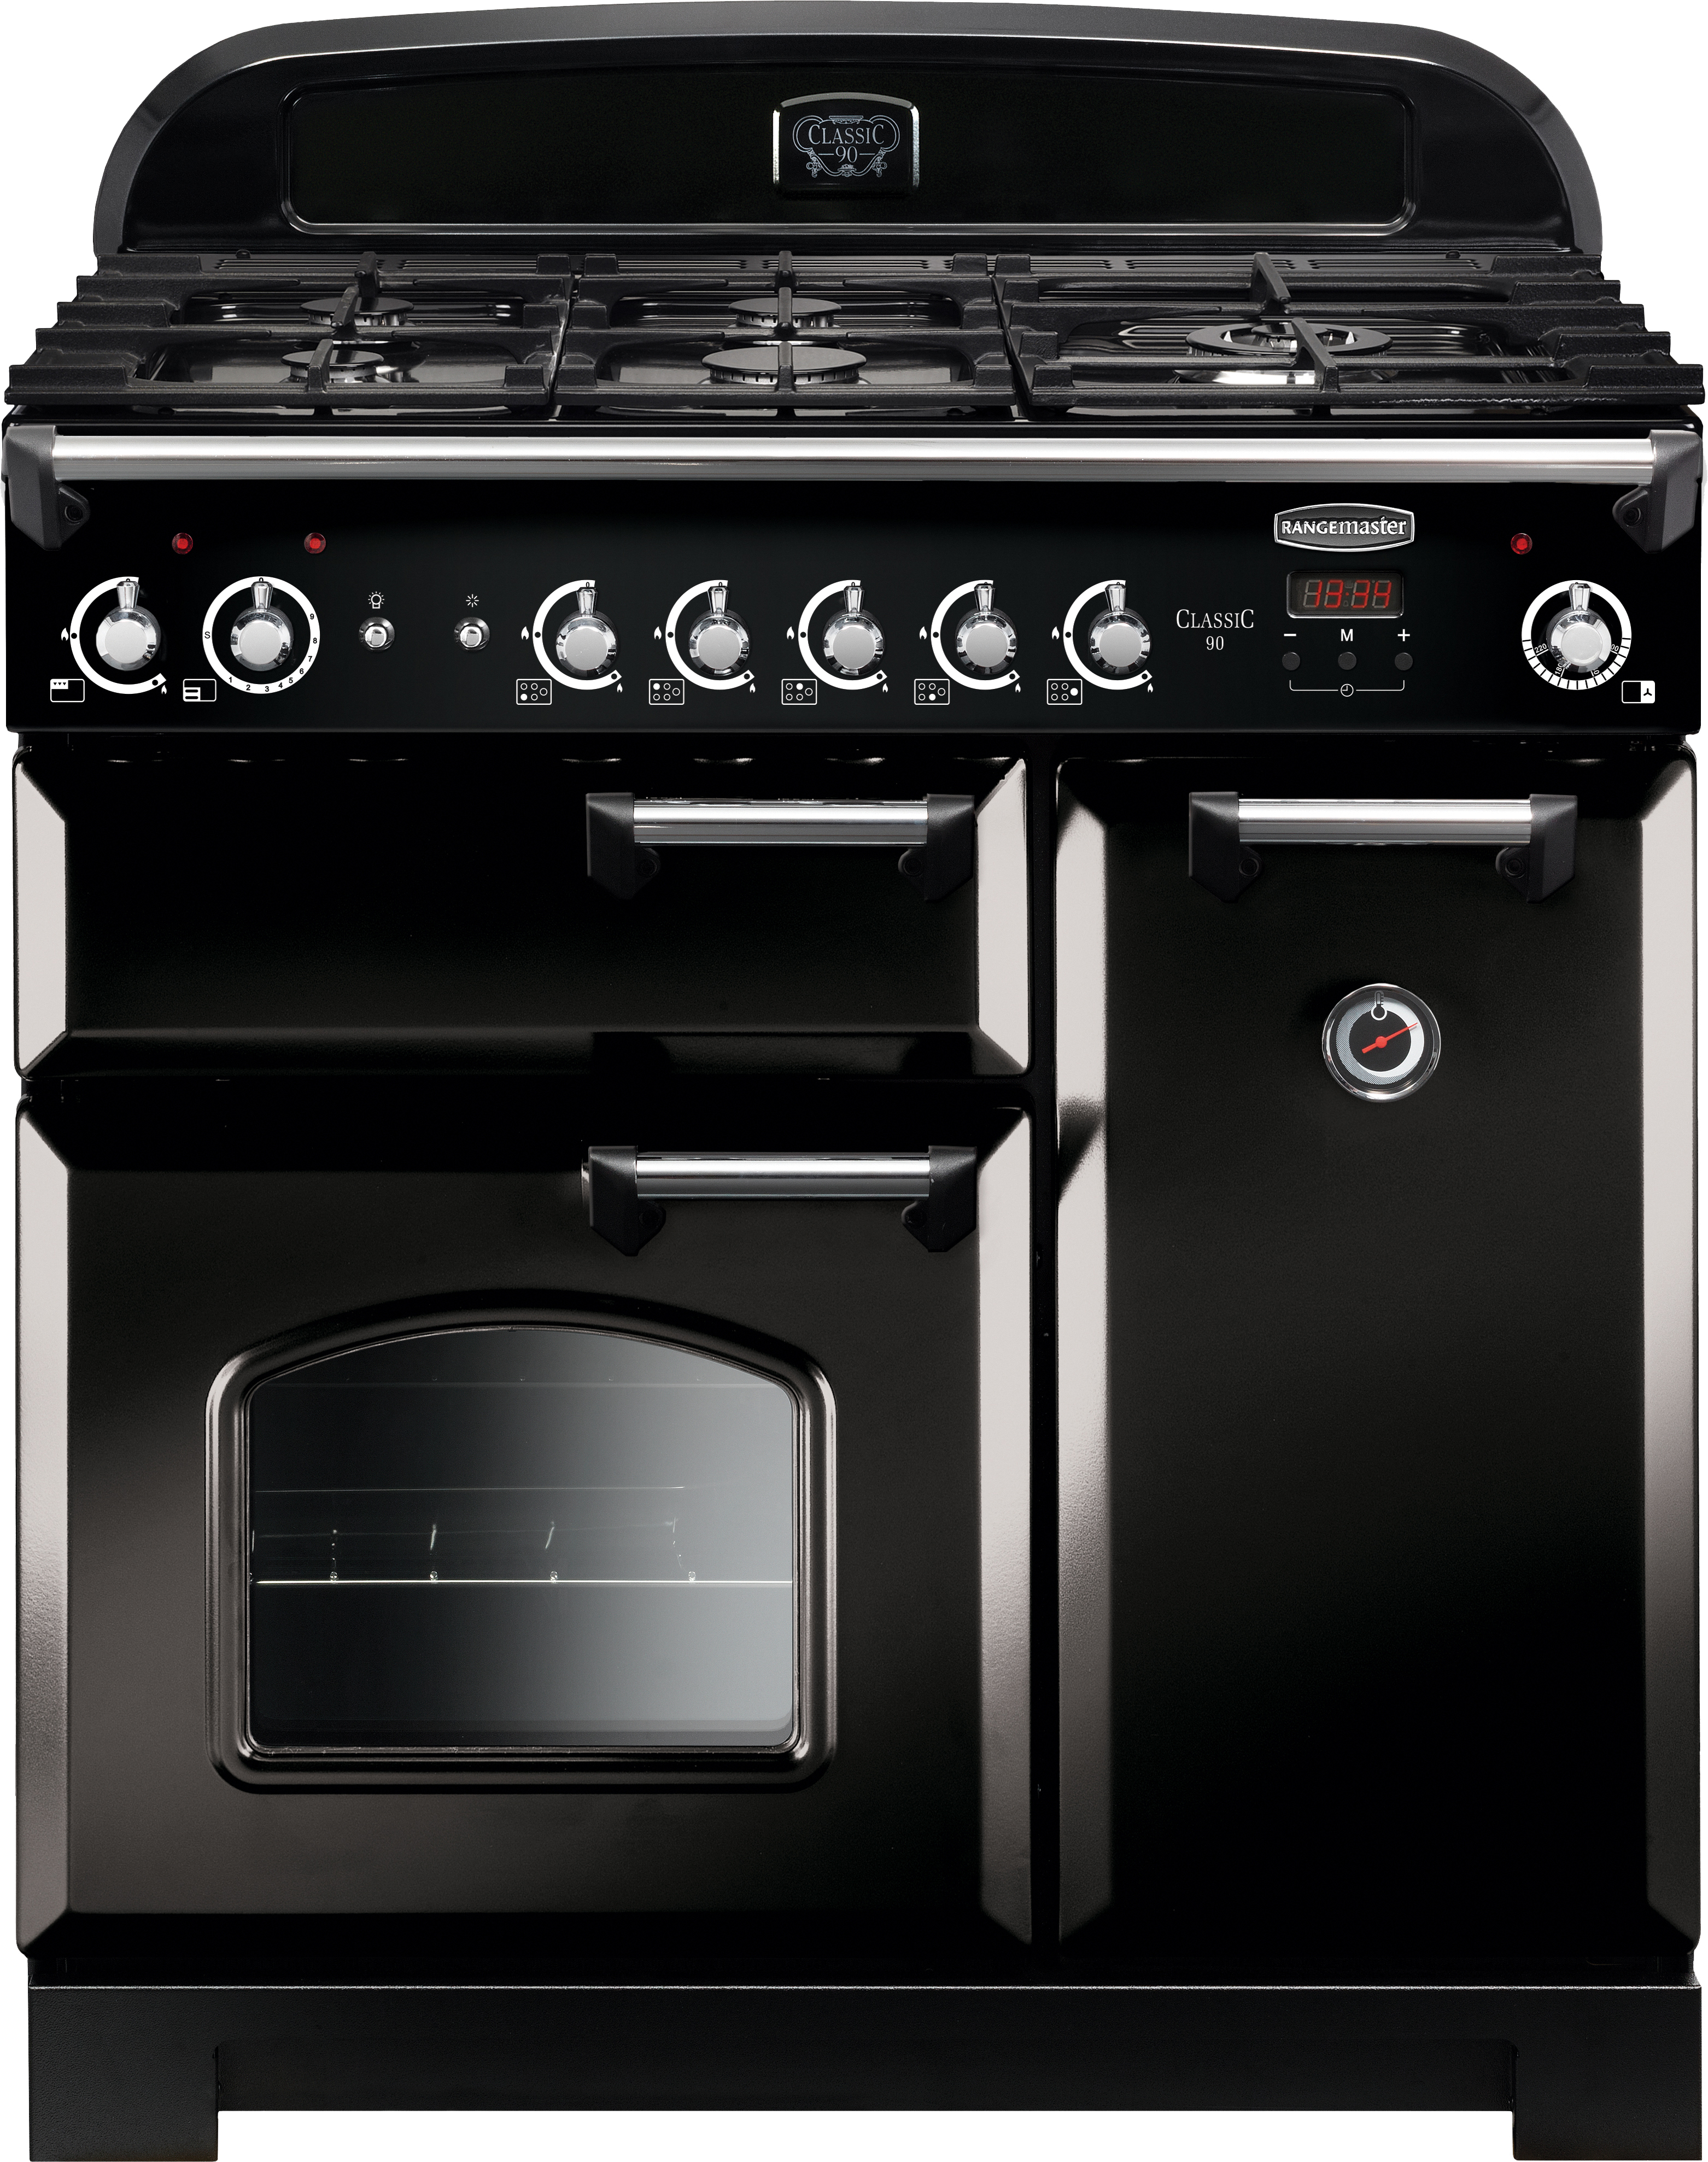 Rangemaster Classic CLA90NGFBL/C 90cm Gas Range Cooker with Electric Fan Oven - Black / Chrome - A+/A Rated, Black